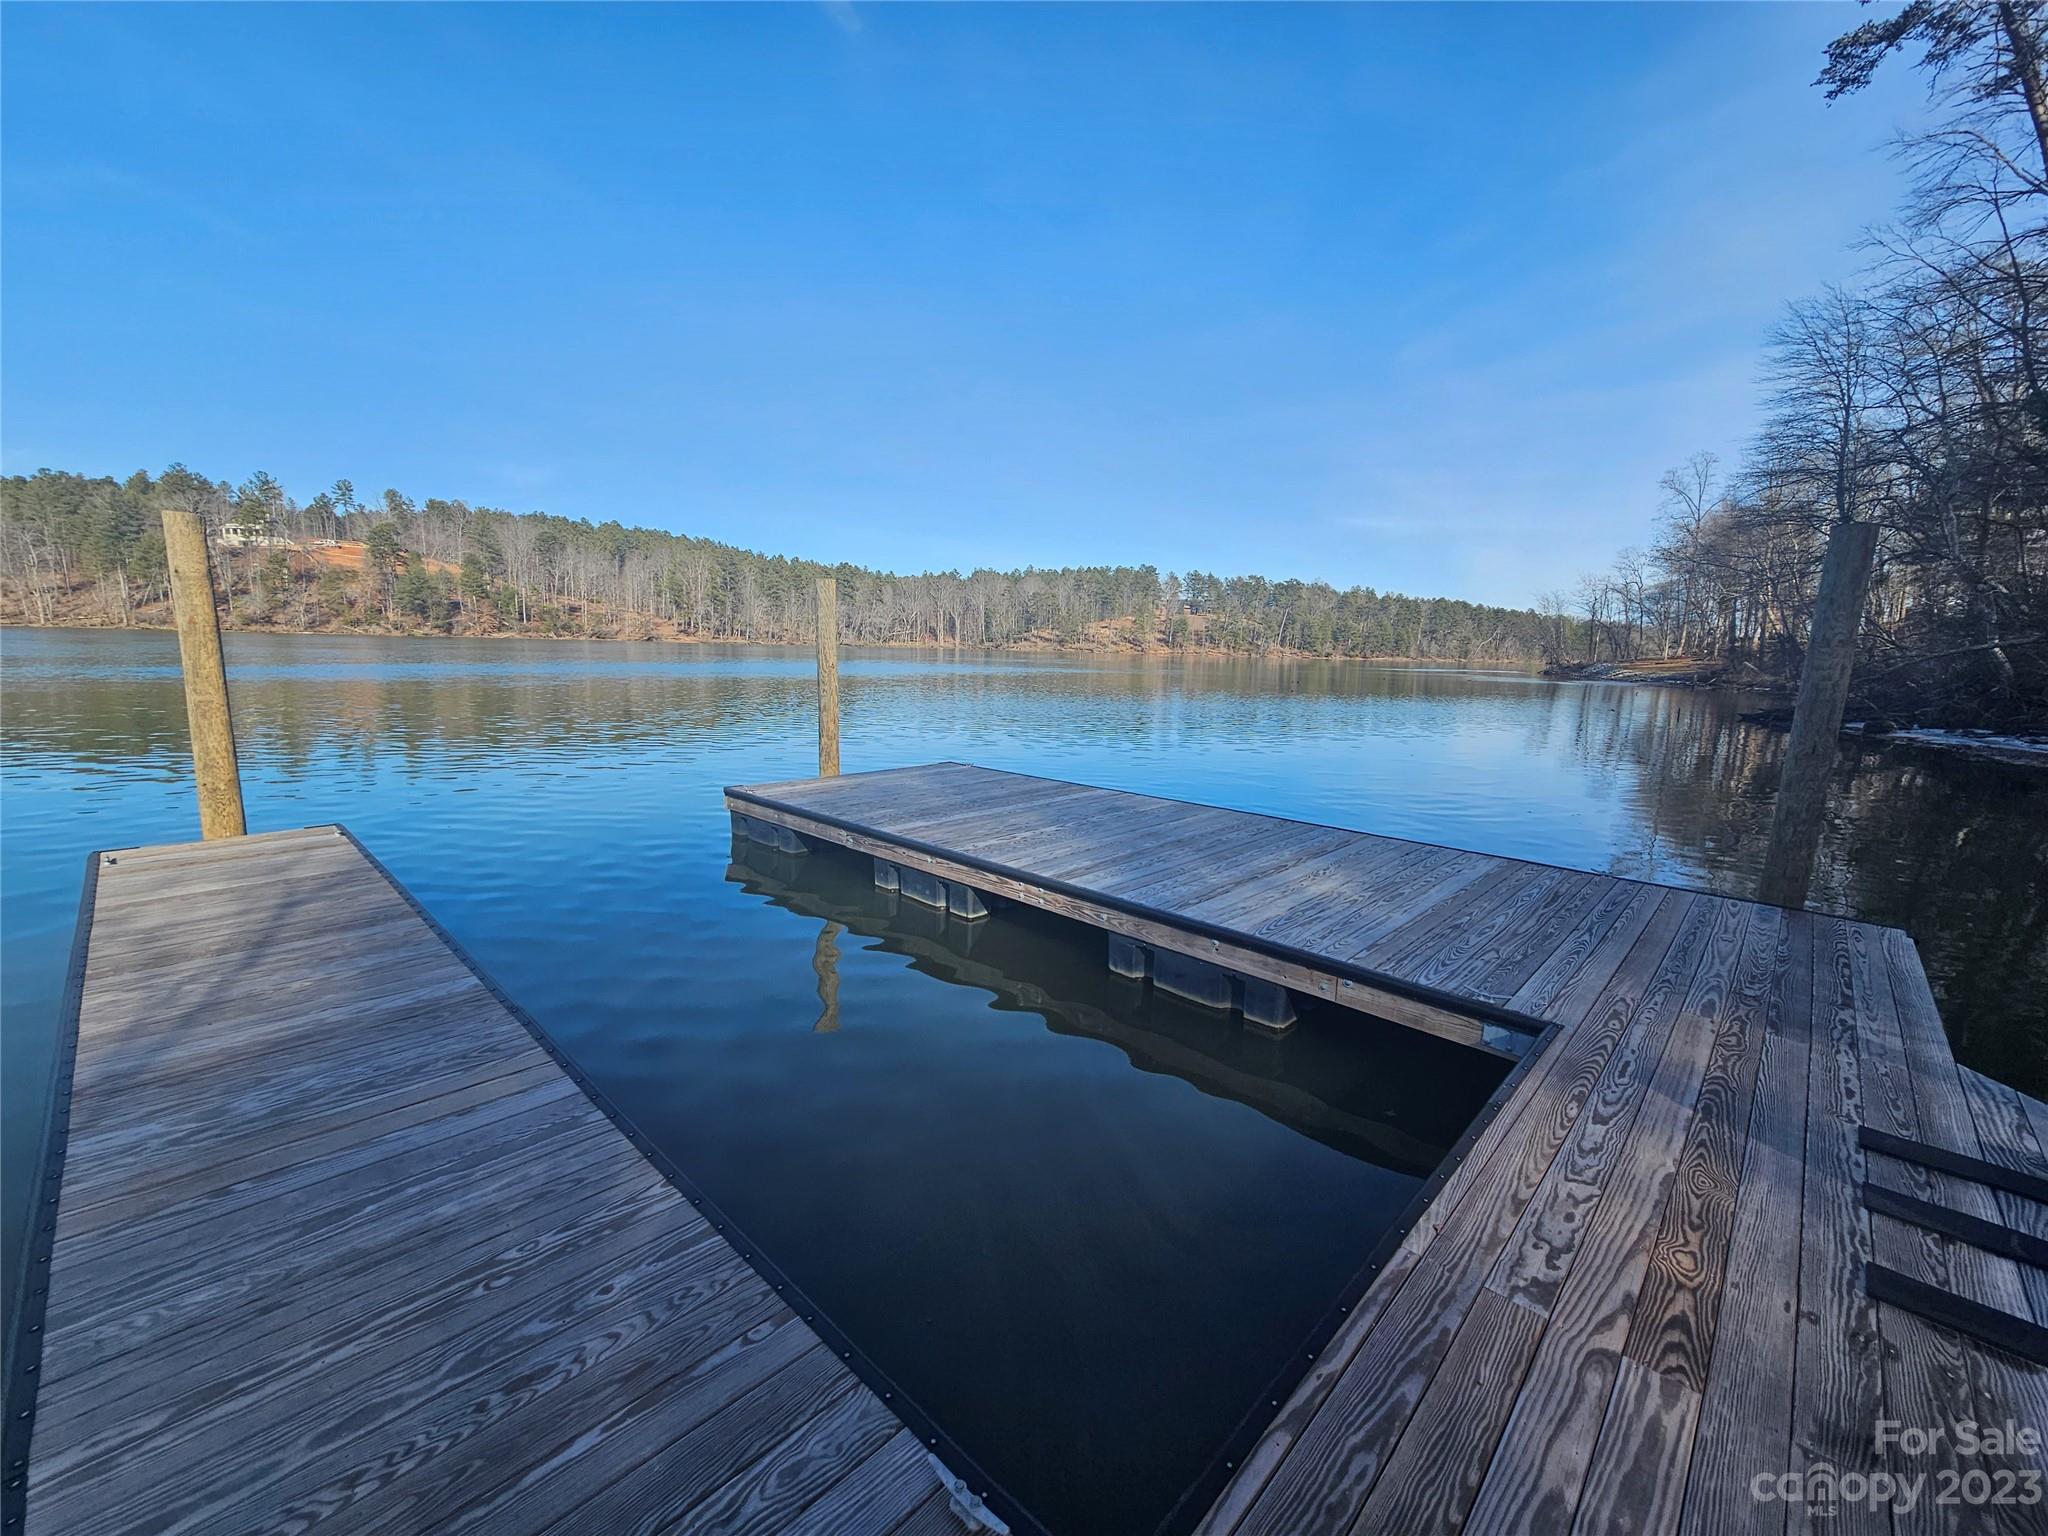 a view of a lake with wooden floor and lake view